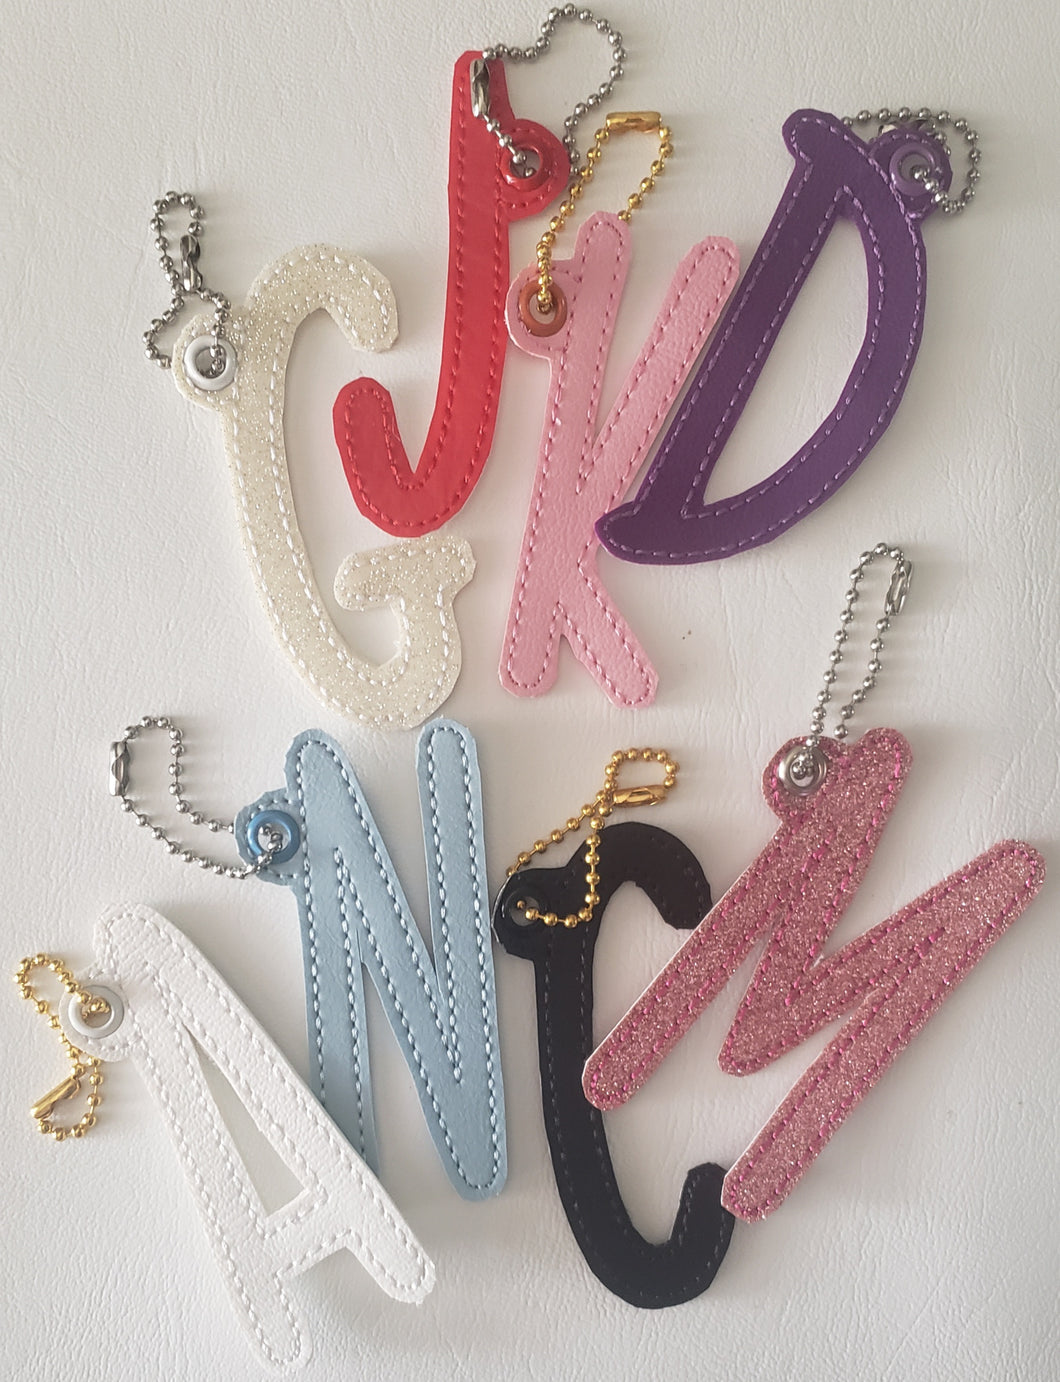 Initial Monogram Letter Charms | The Melon Patch by Deb™